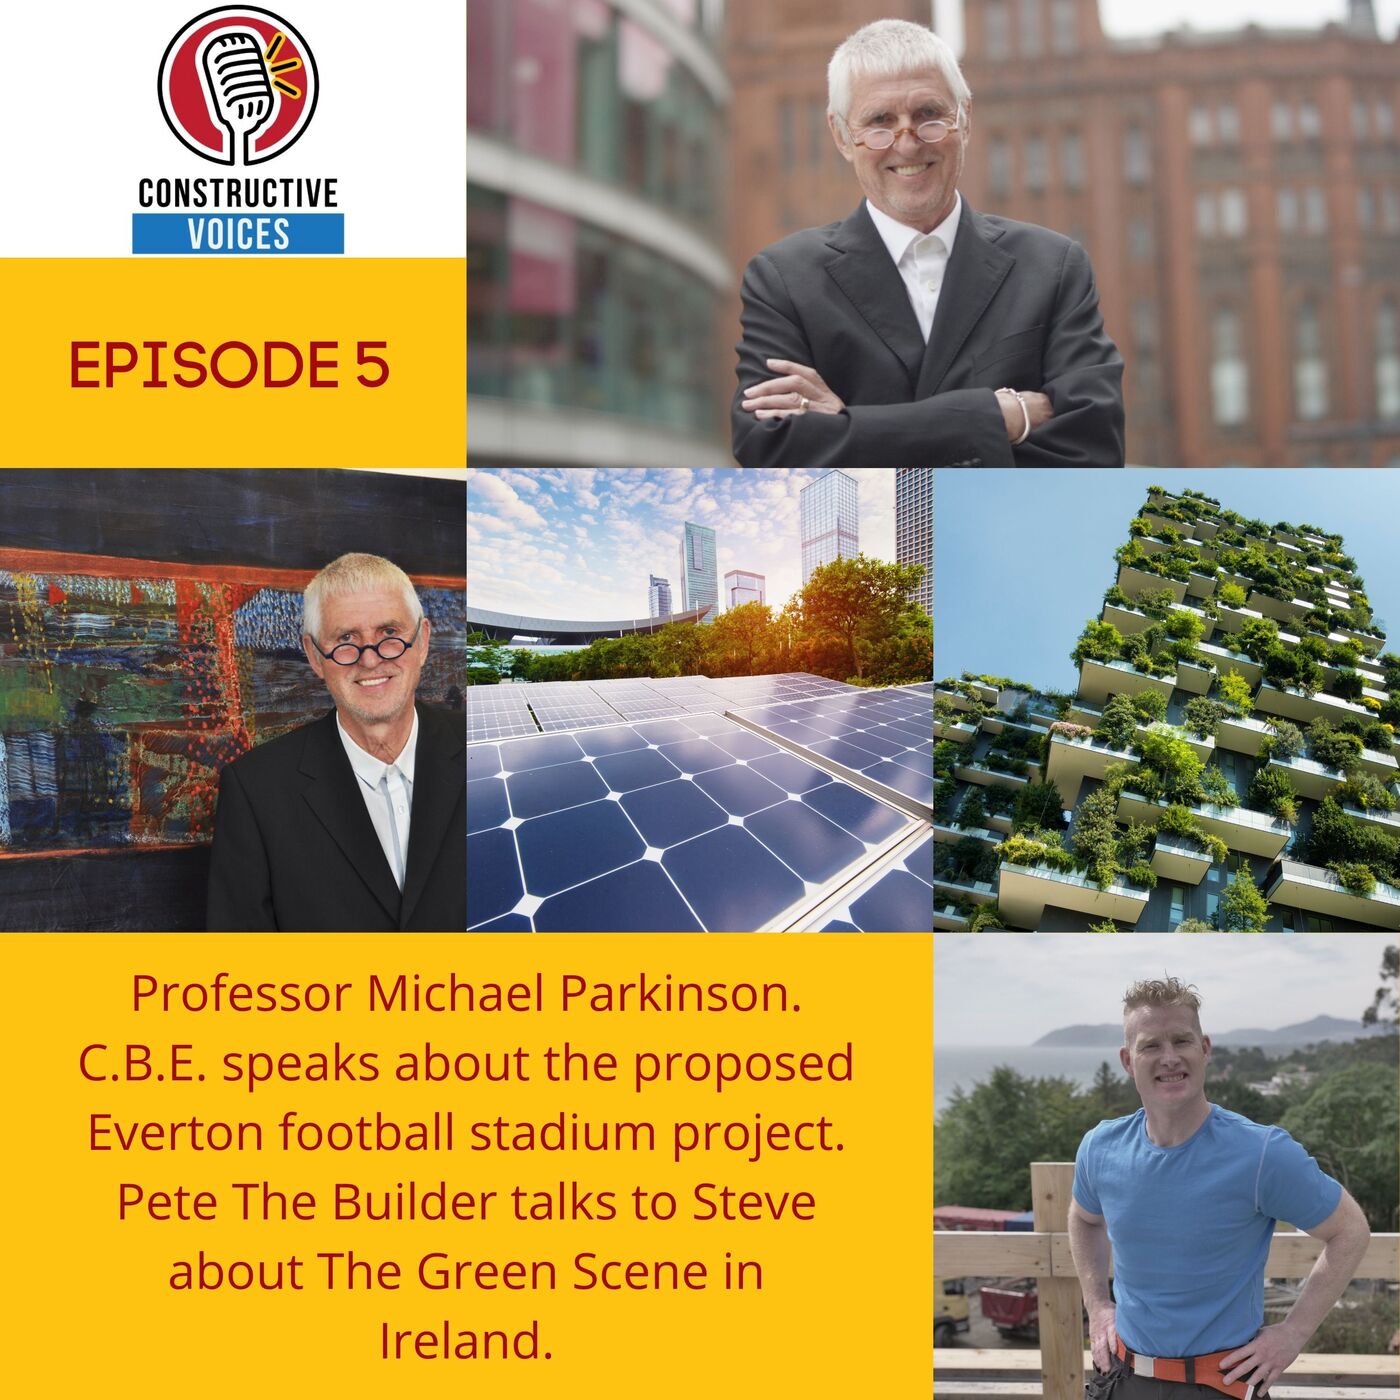 Professor Michael Parkinson. C.B.E. speaks about the proposed Everton football stadium project. Pete The Builder talks to Steve about The Green Scene in Ireland.